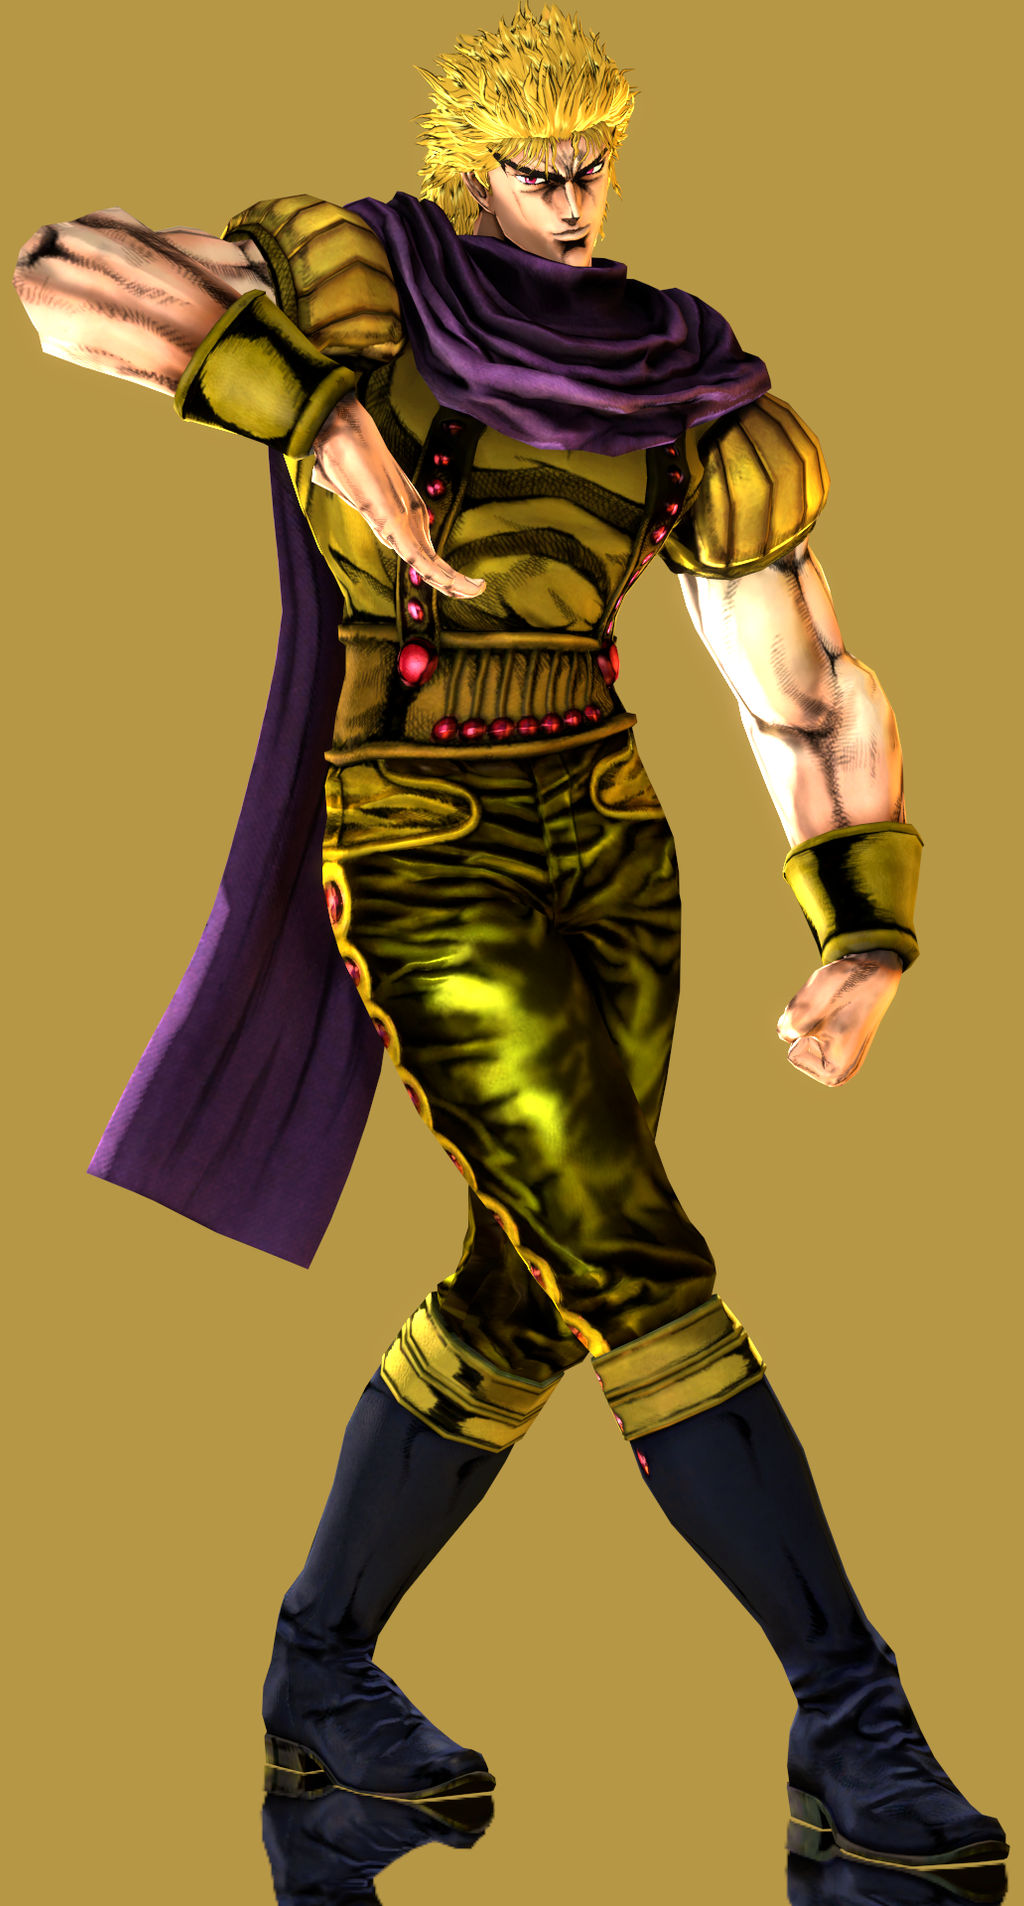 Dio Brando (Costume 1) by Yare-Yare-Dong on DeviantArt